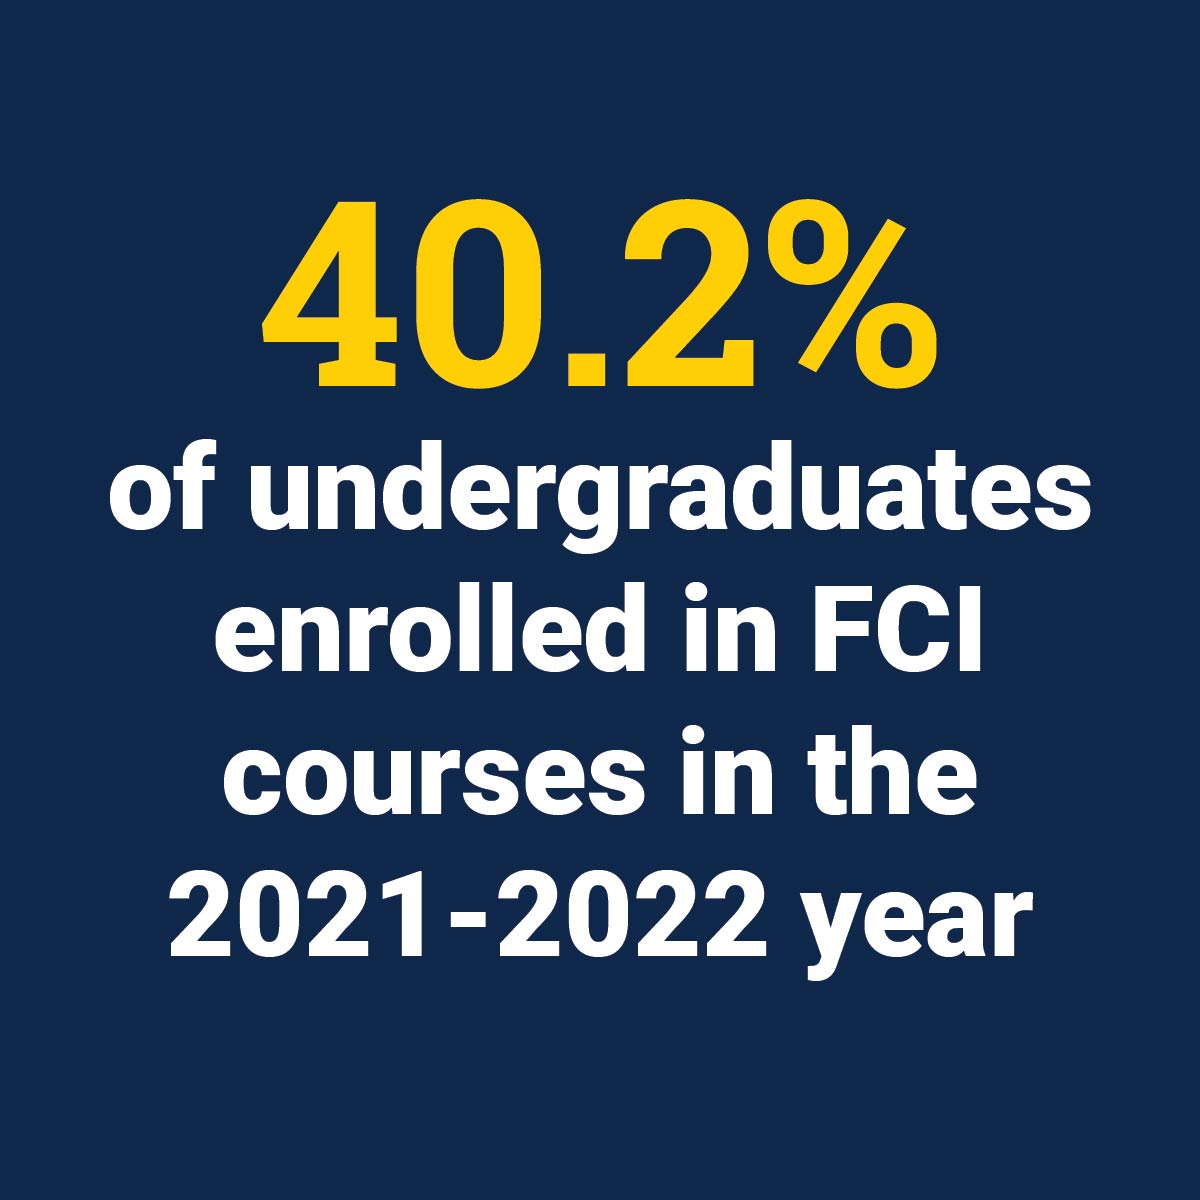 46% of undergraduates enrolled in FCI courses in the 2021-2022 year